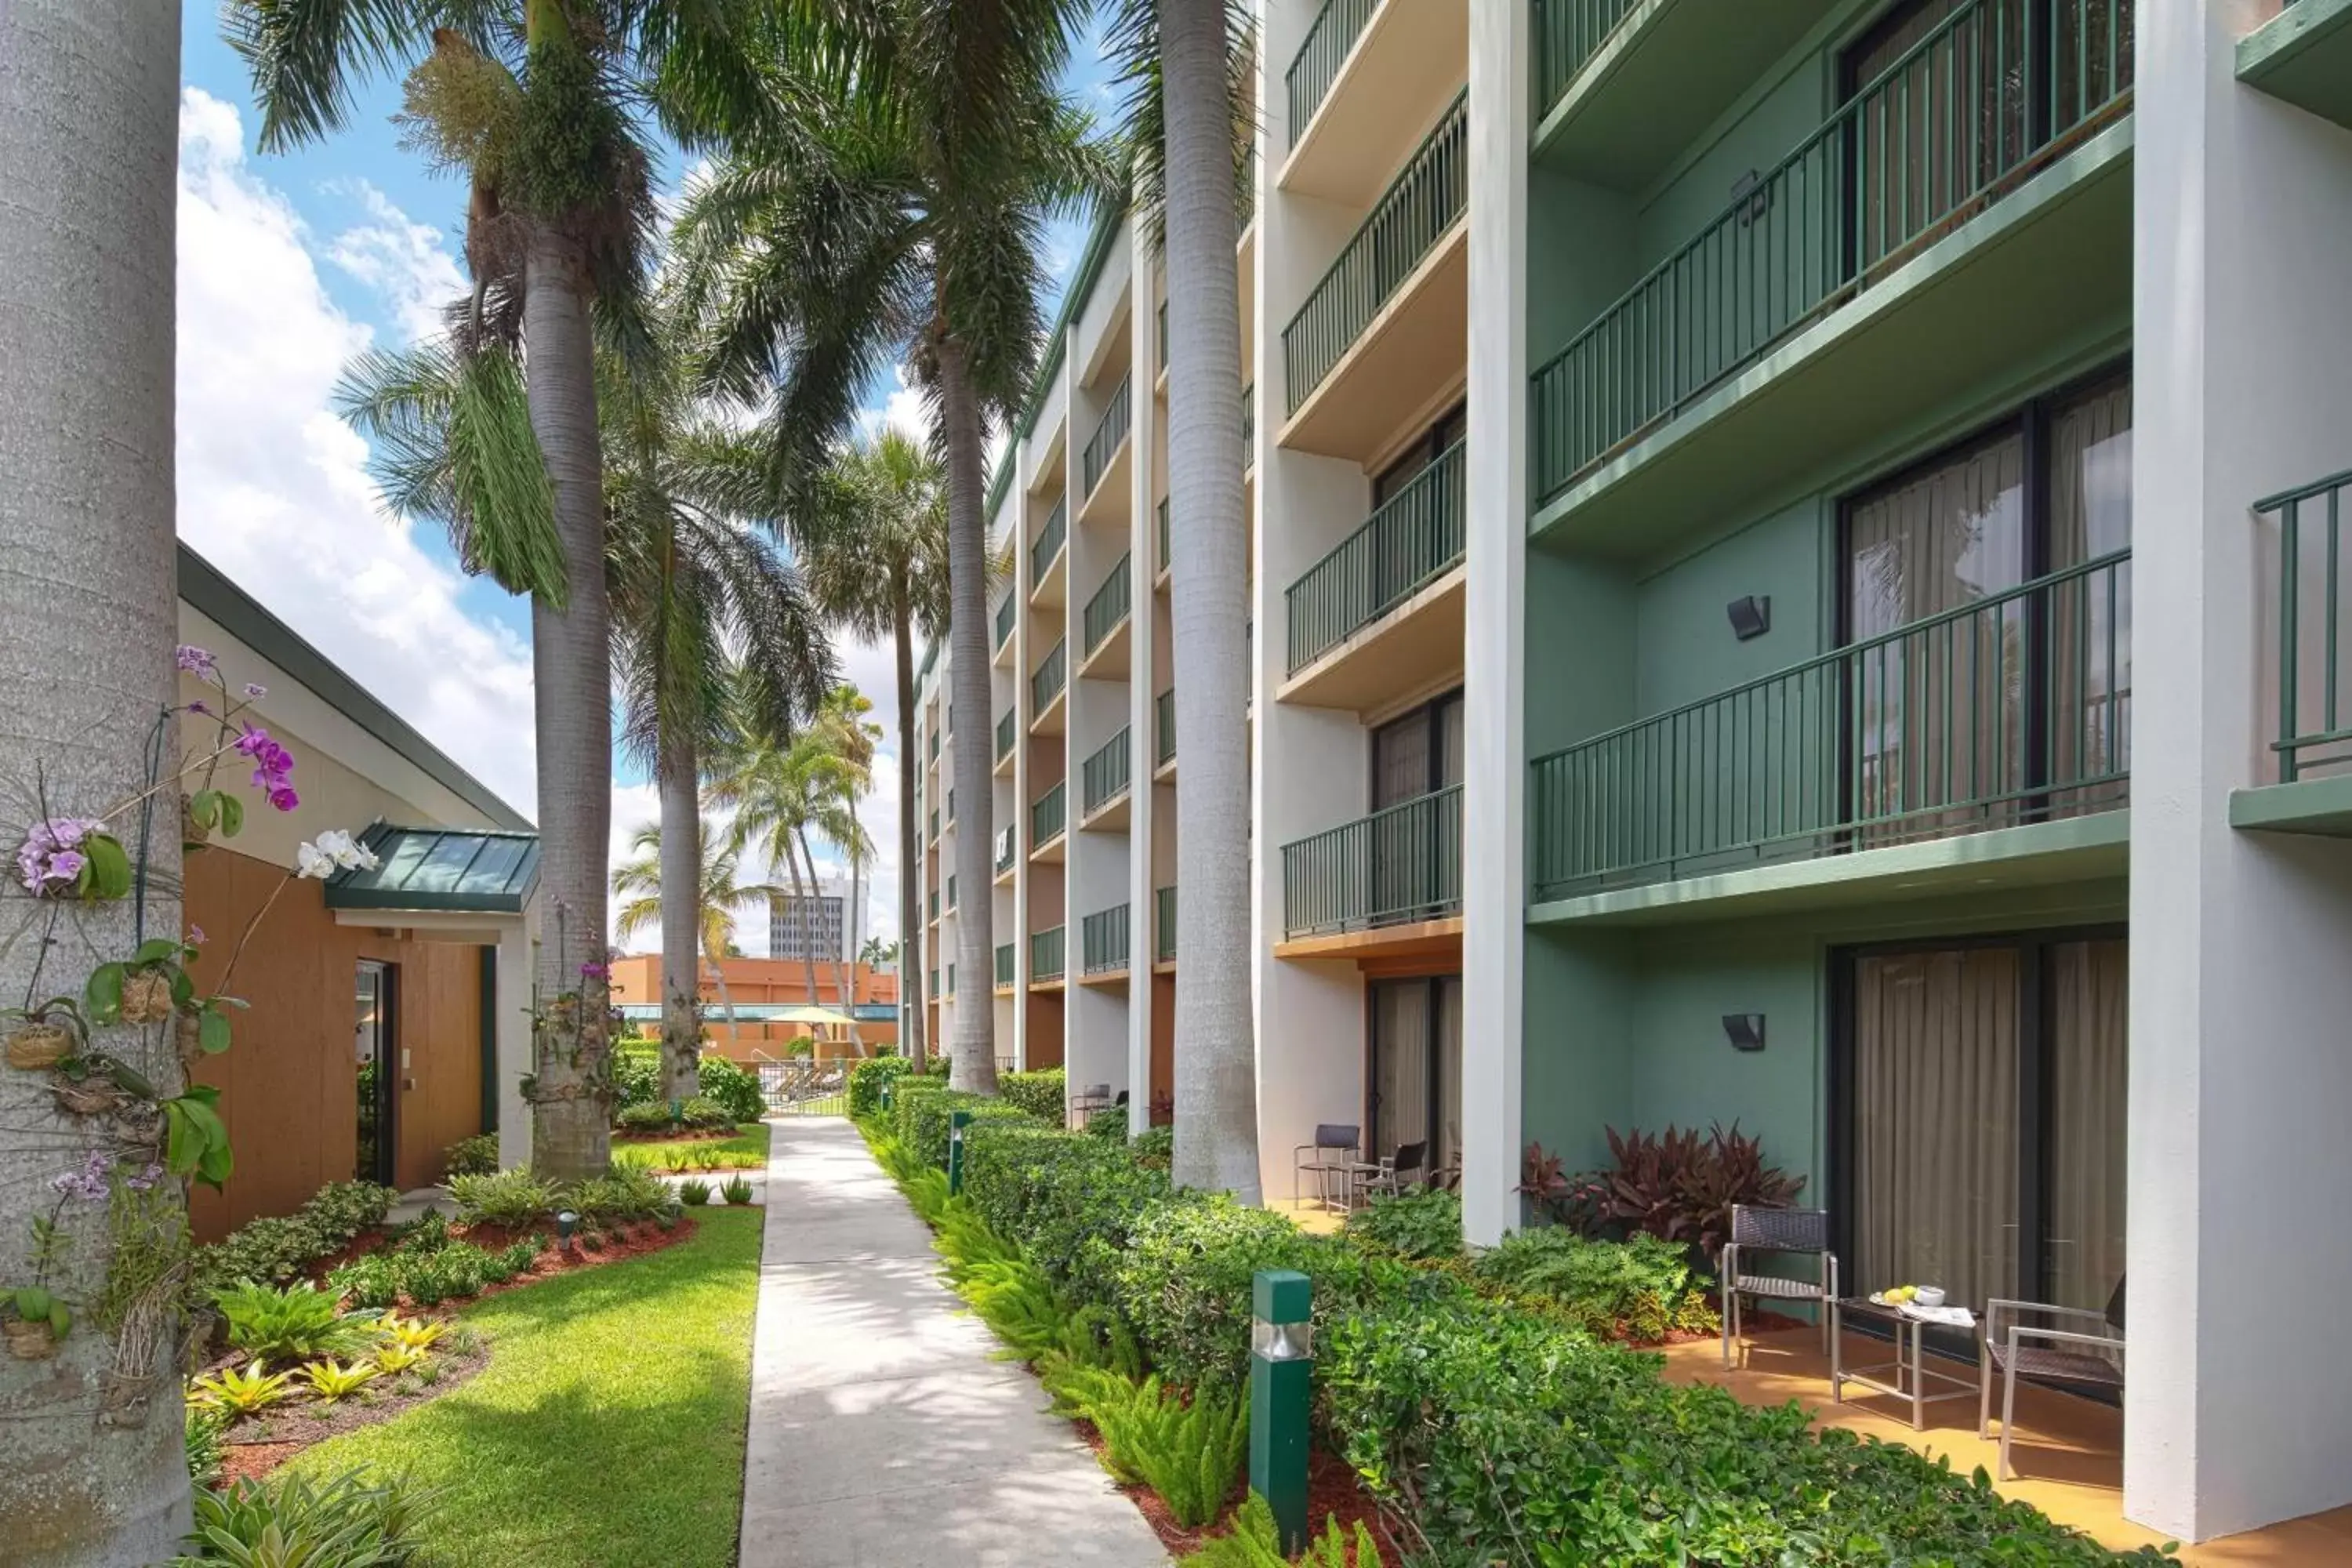 Property Building in Courtyard by Marriott Fort Lauderdale East / Lauderdale-by-the-Sea